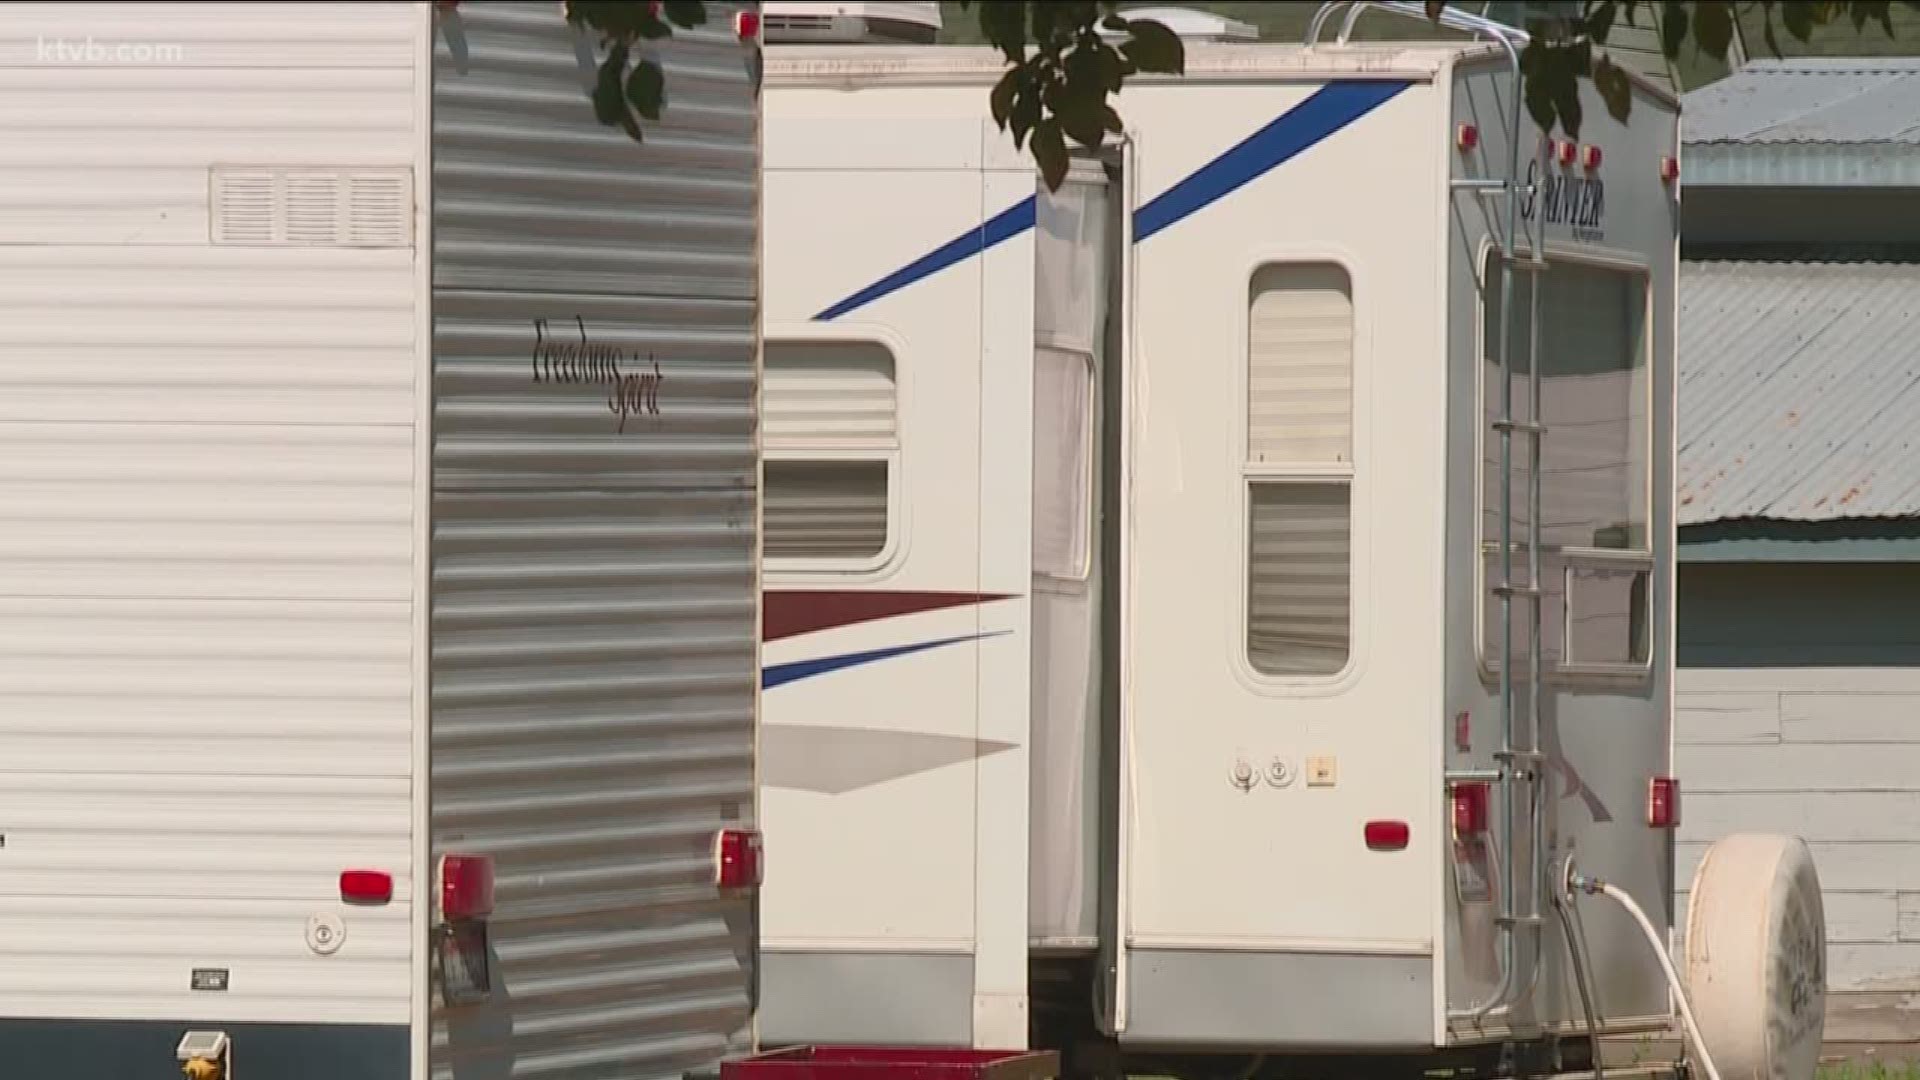 New Meadows to ban RV's as residences.